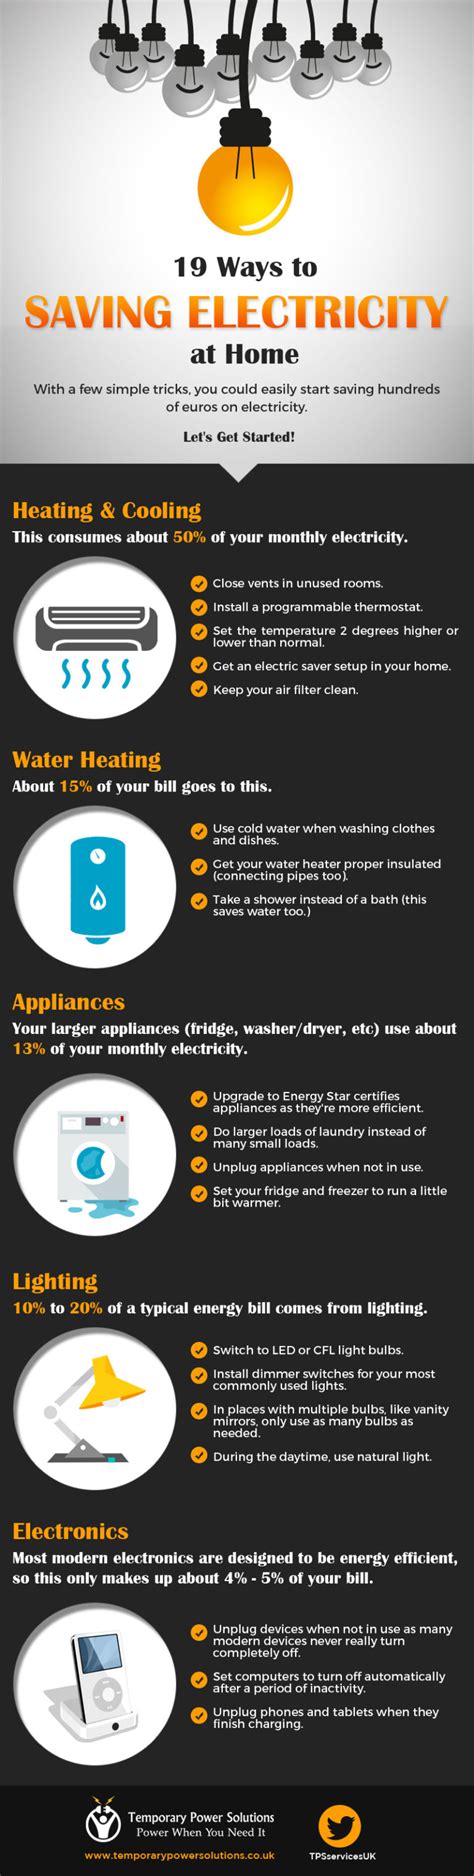 19 Ways To Save Electricity At Home Infographic The Local Brand